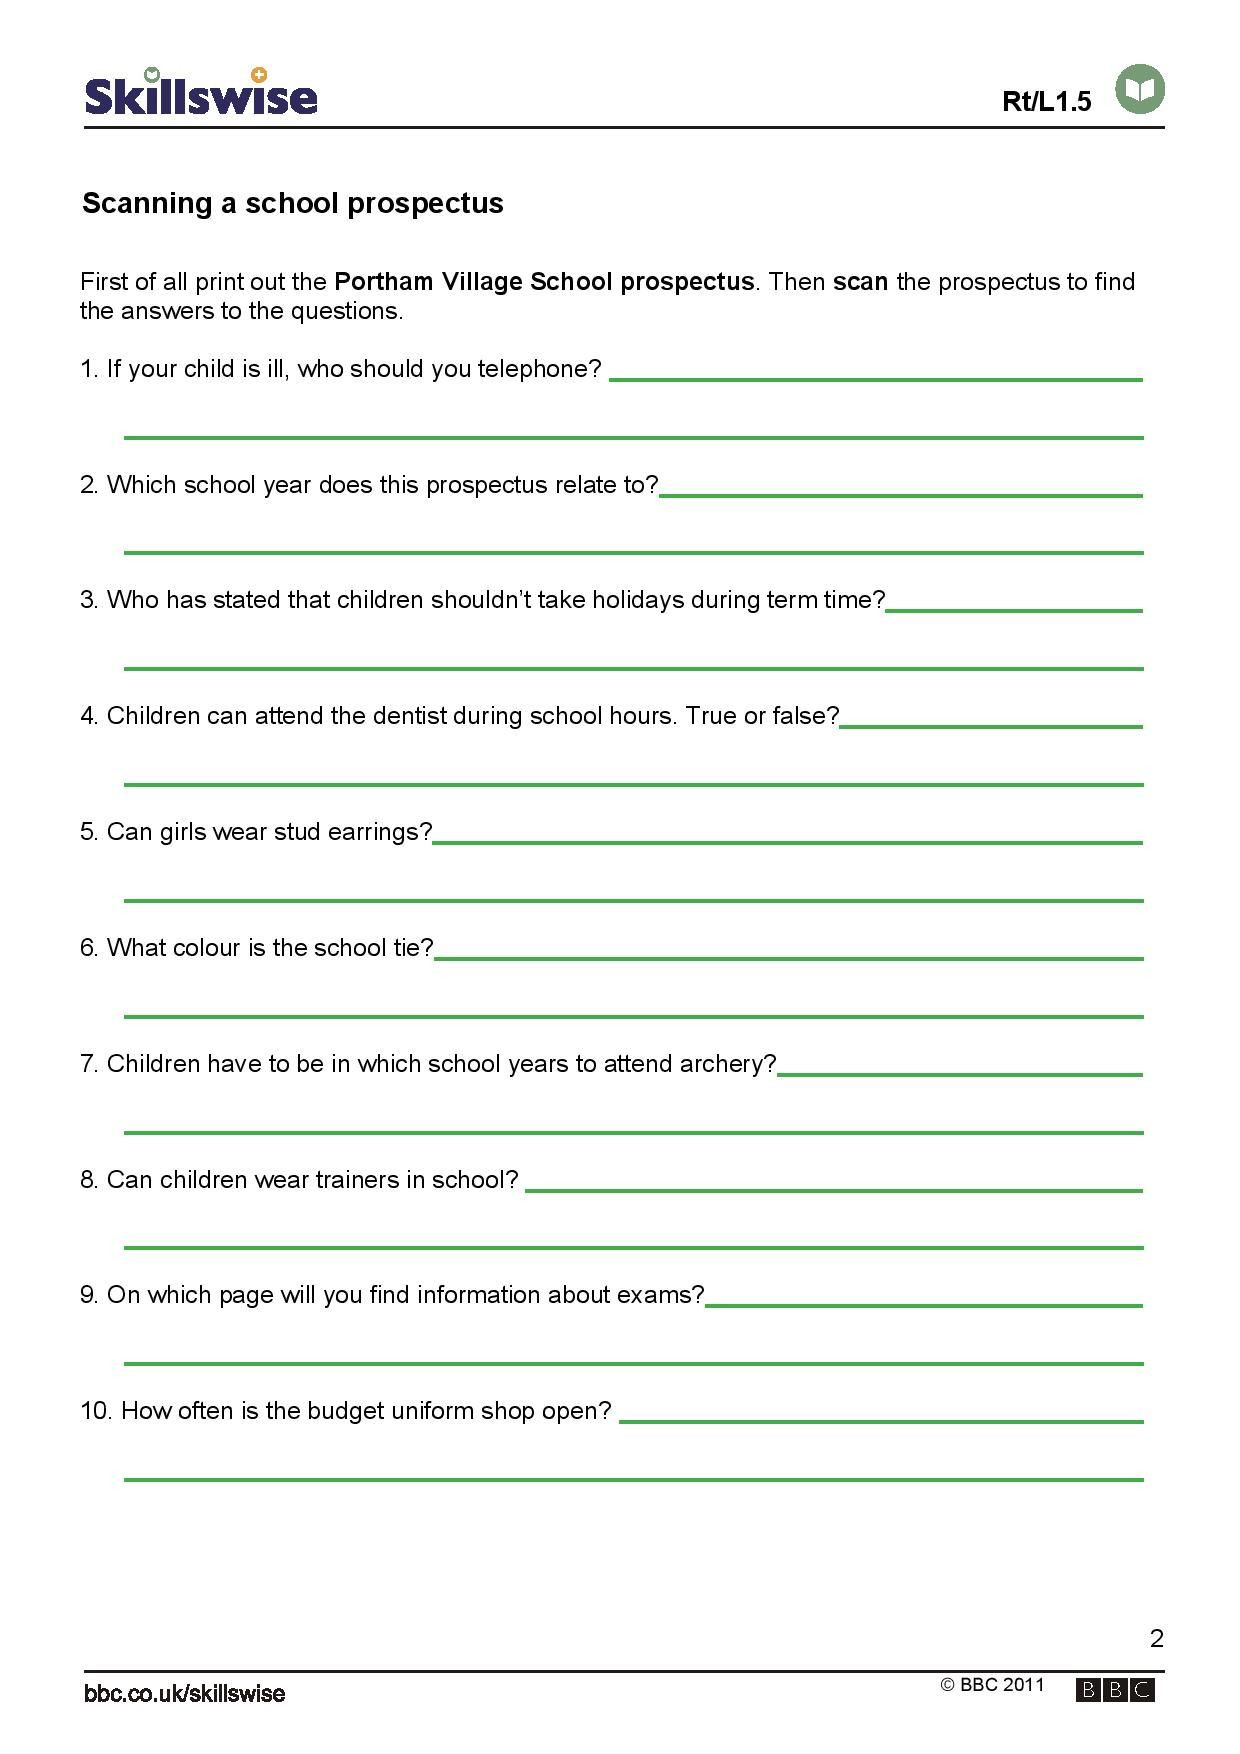 Macromolecules Worksheet 2 Answers Exercise In Scanning An Example Of A School Prospectus to